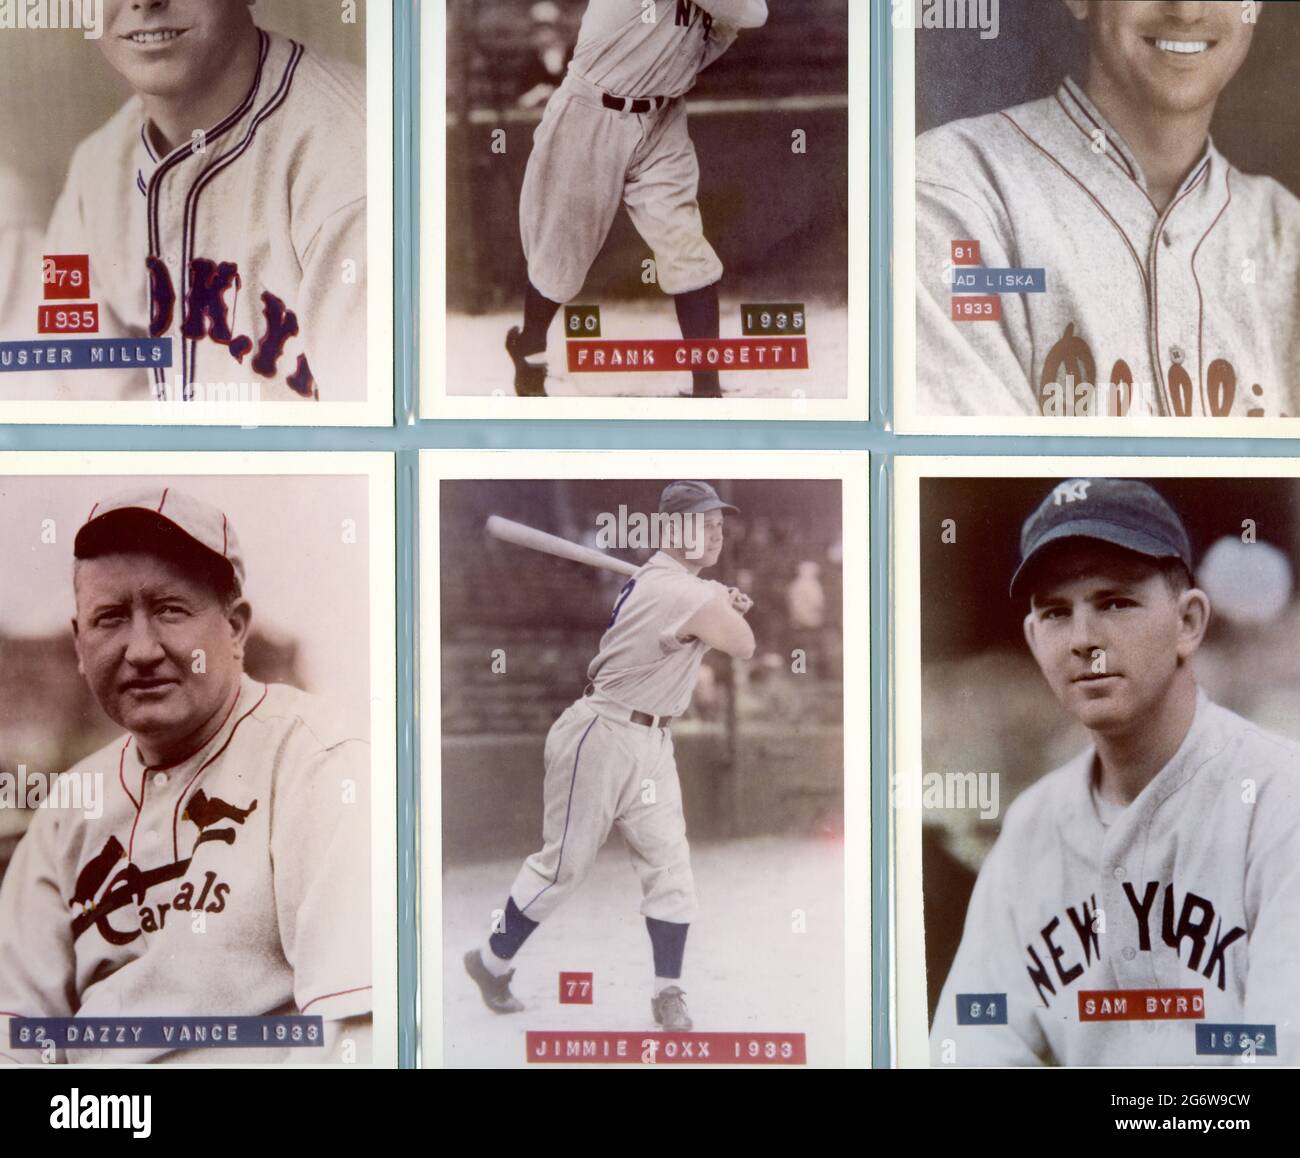 A collection of antique photos of baseball players form the 1930s Stock Photo